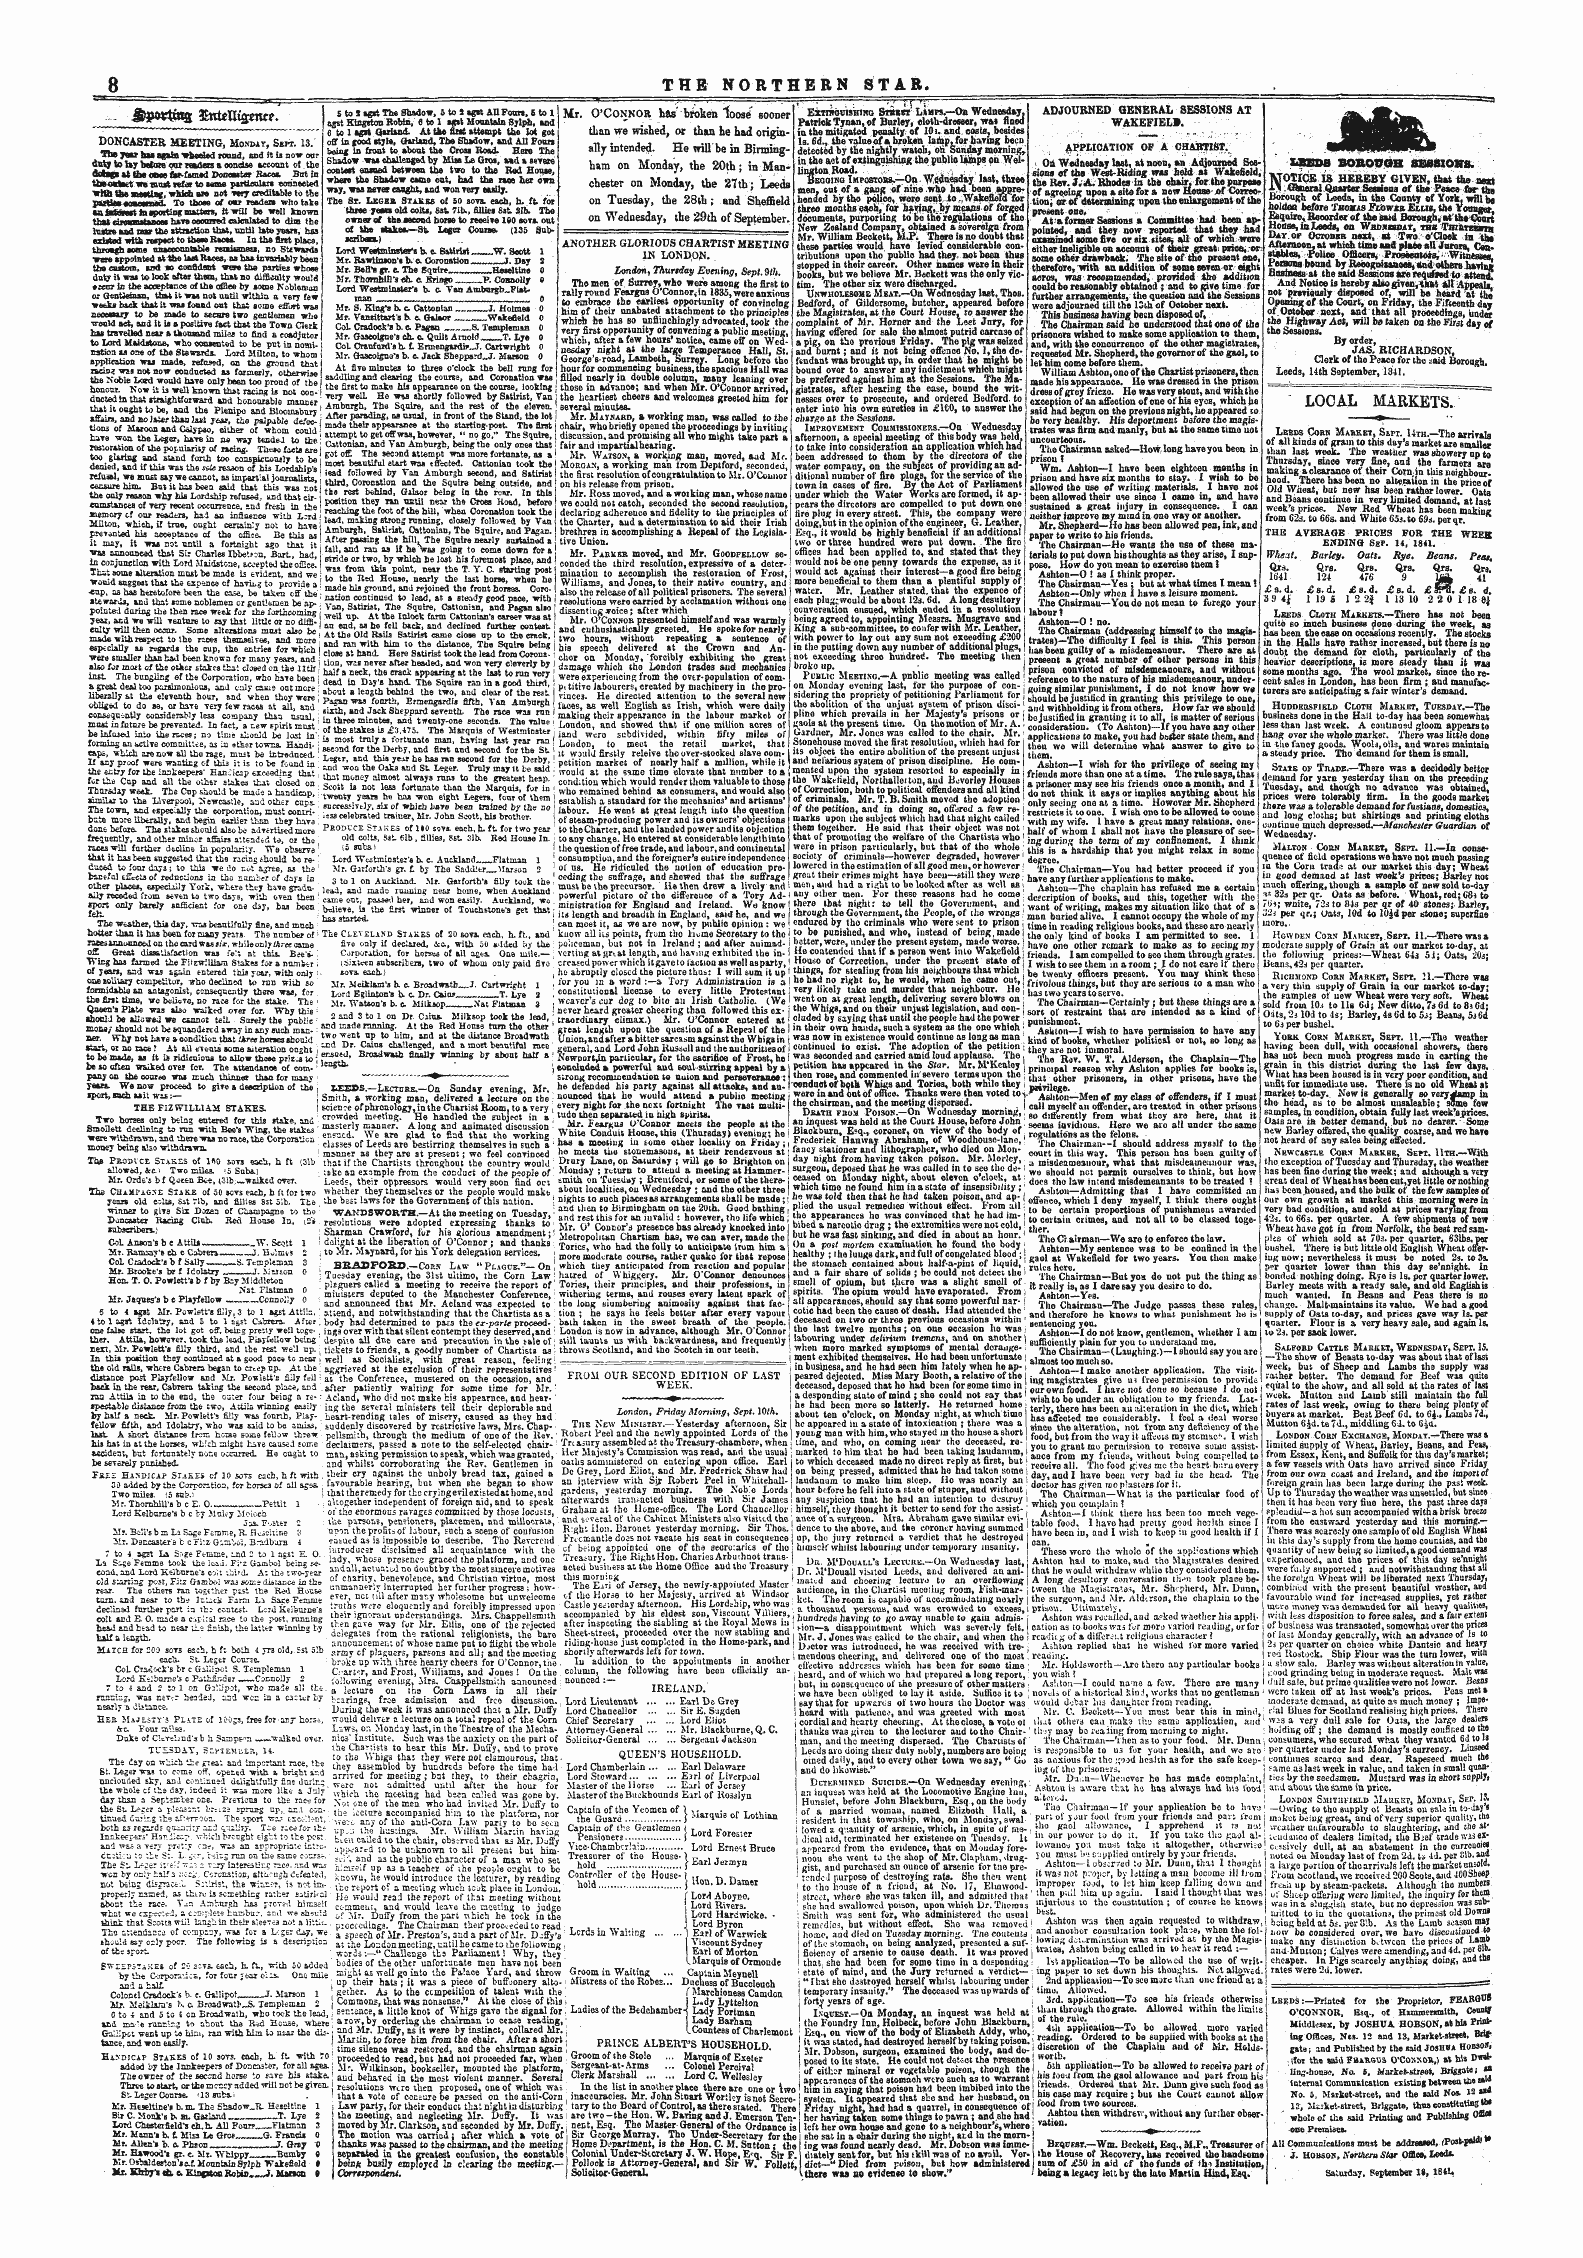 Northern Star 17 1852 18th September 1841 Edition 1 Of 5 Page 8 From Our Second Edition Of Last Week Nineteenth Century Serials Edition